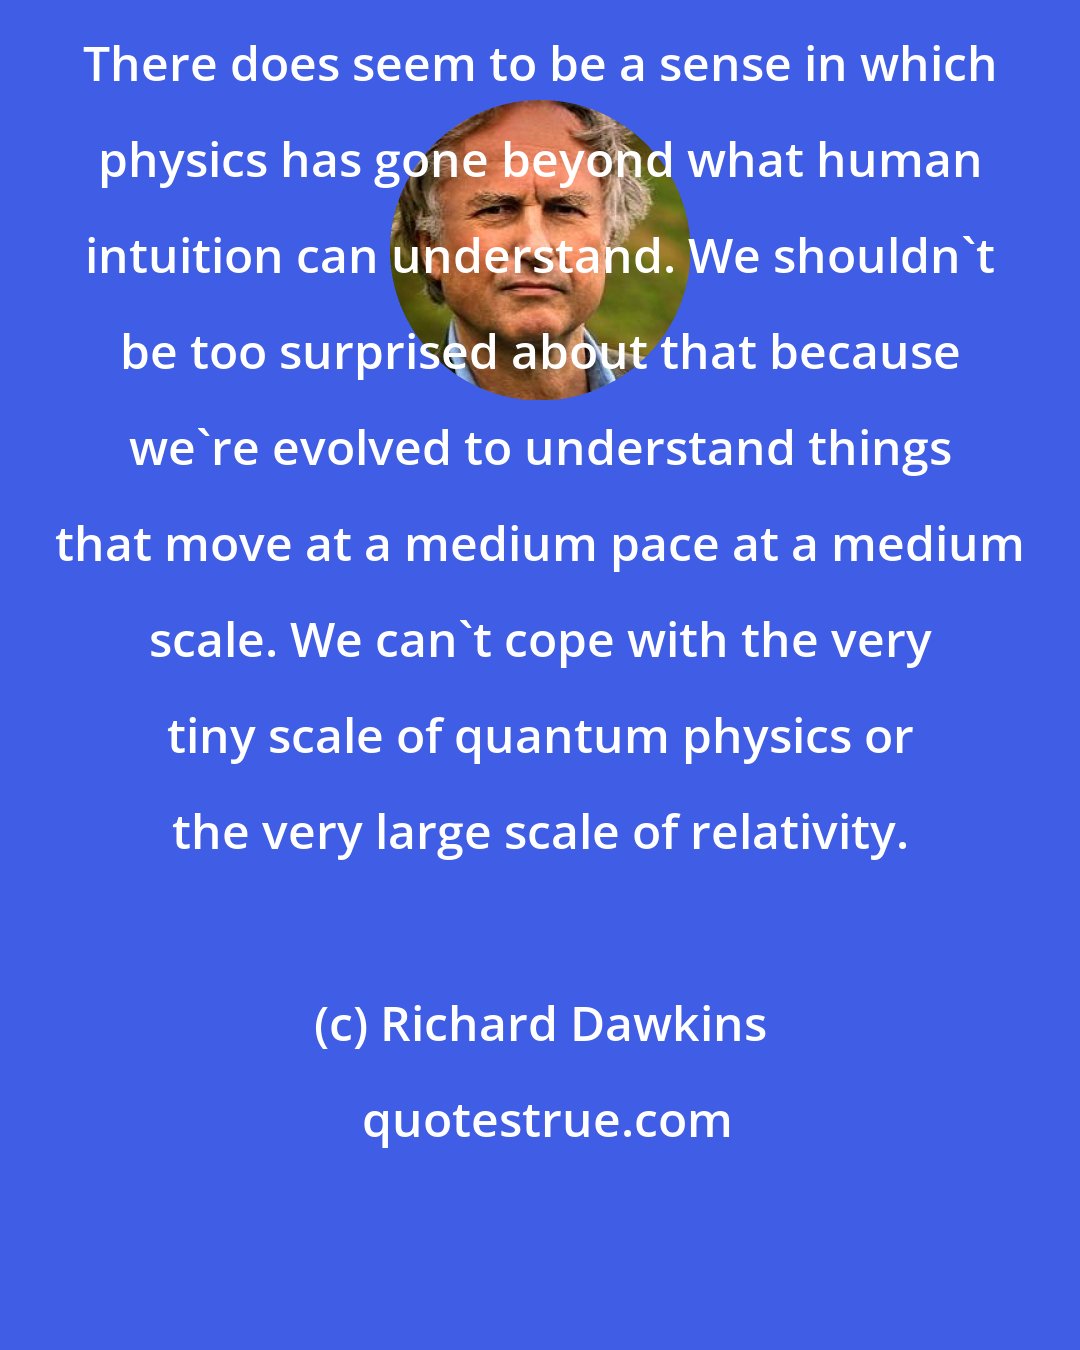 Richard Dawkins: There does seem to be a sense in which physics has gone beyond what human intuition can understand. We shouldn't be too surprised about that because we're evolved to understand things that move at a medium pace at a medium scale. We can't cope with the very tiny scale of quantum physics or the very large scale of relativity.